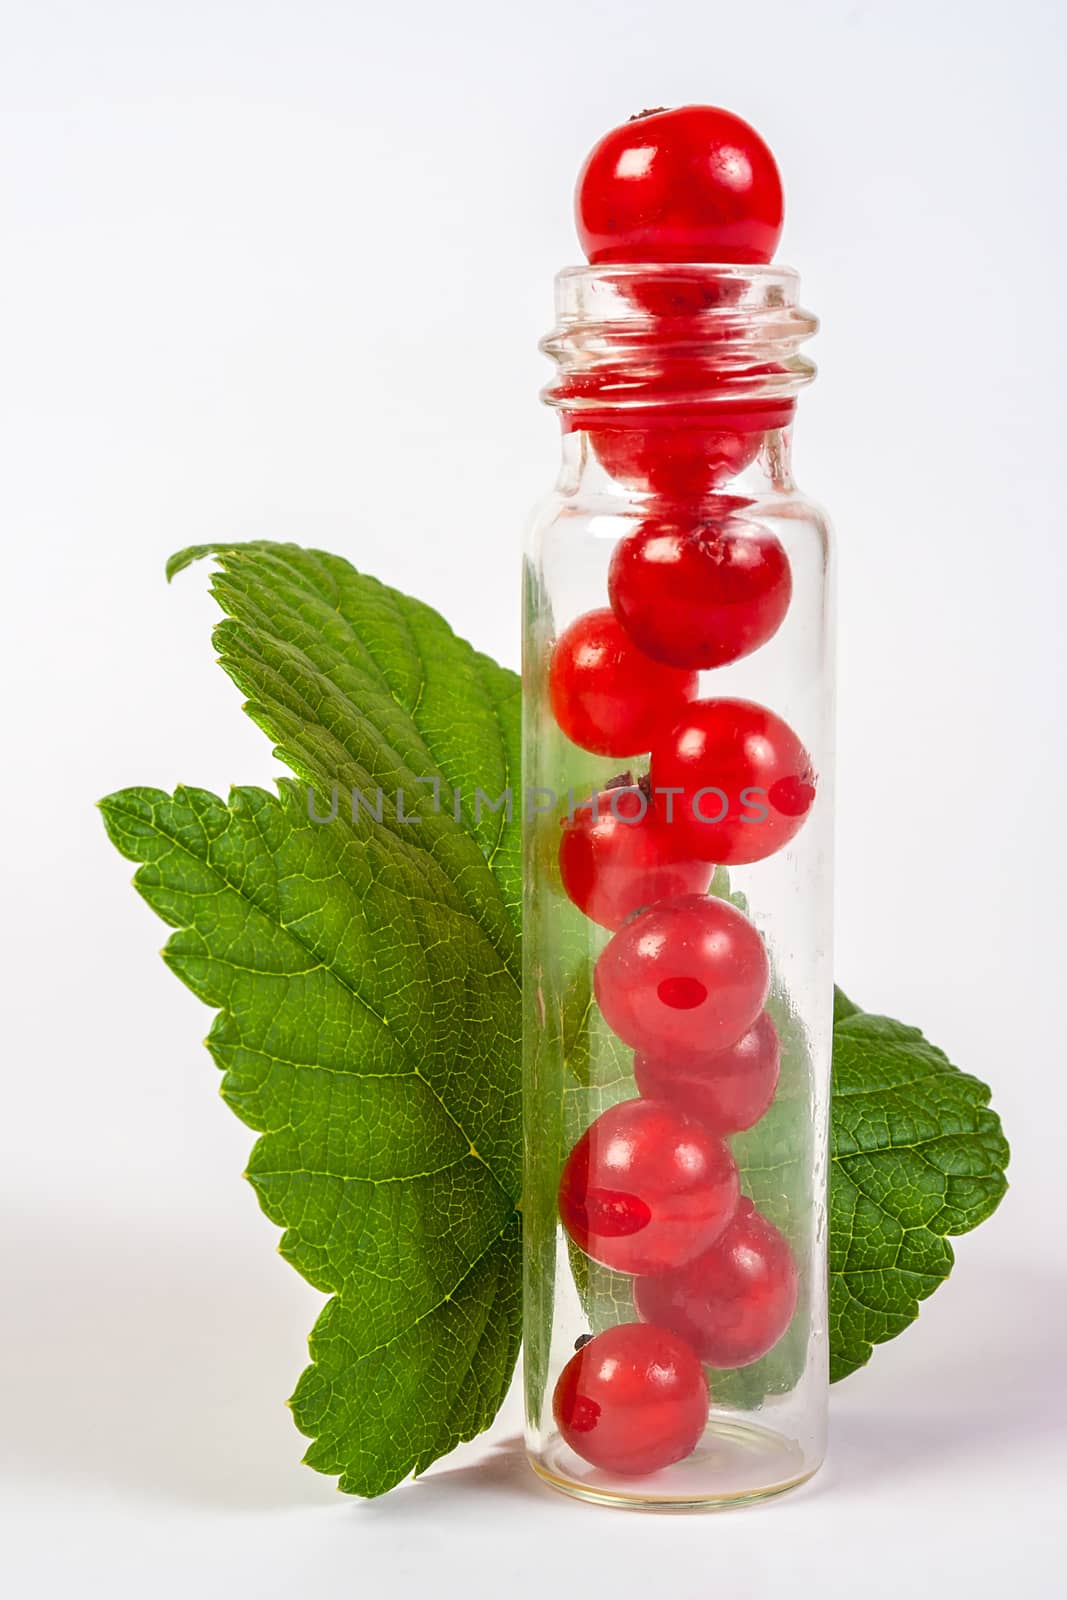 natural cosmetics concept  made of redcurrant   on white background with green leafs